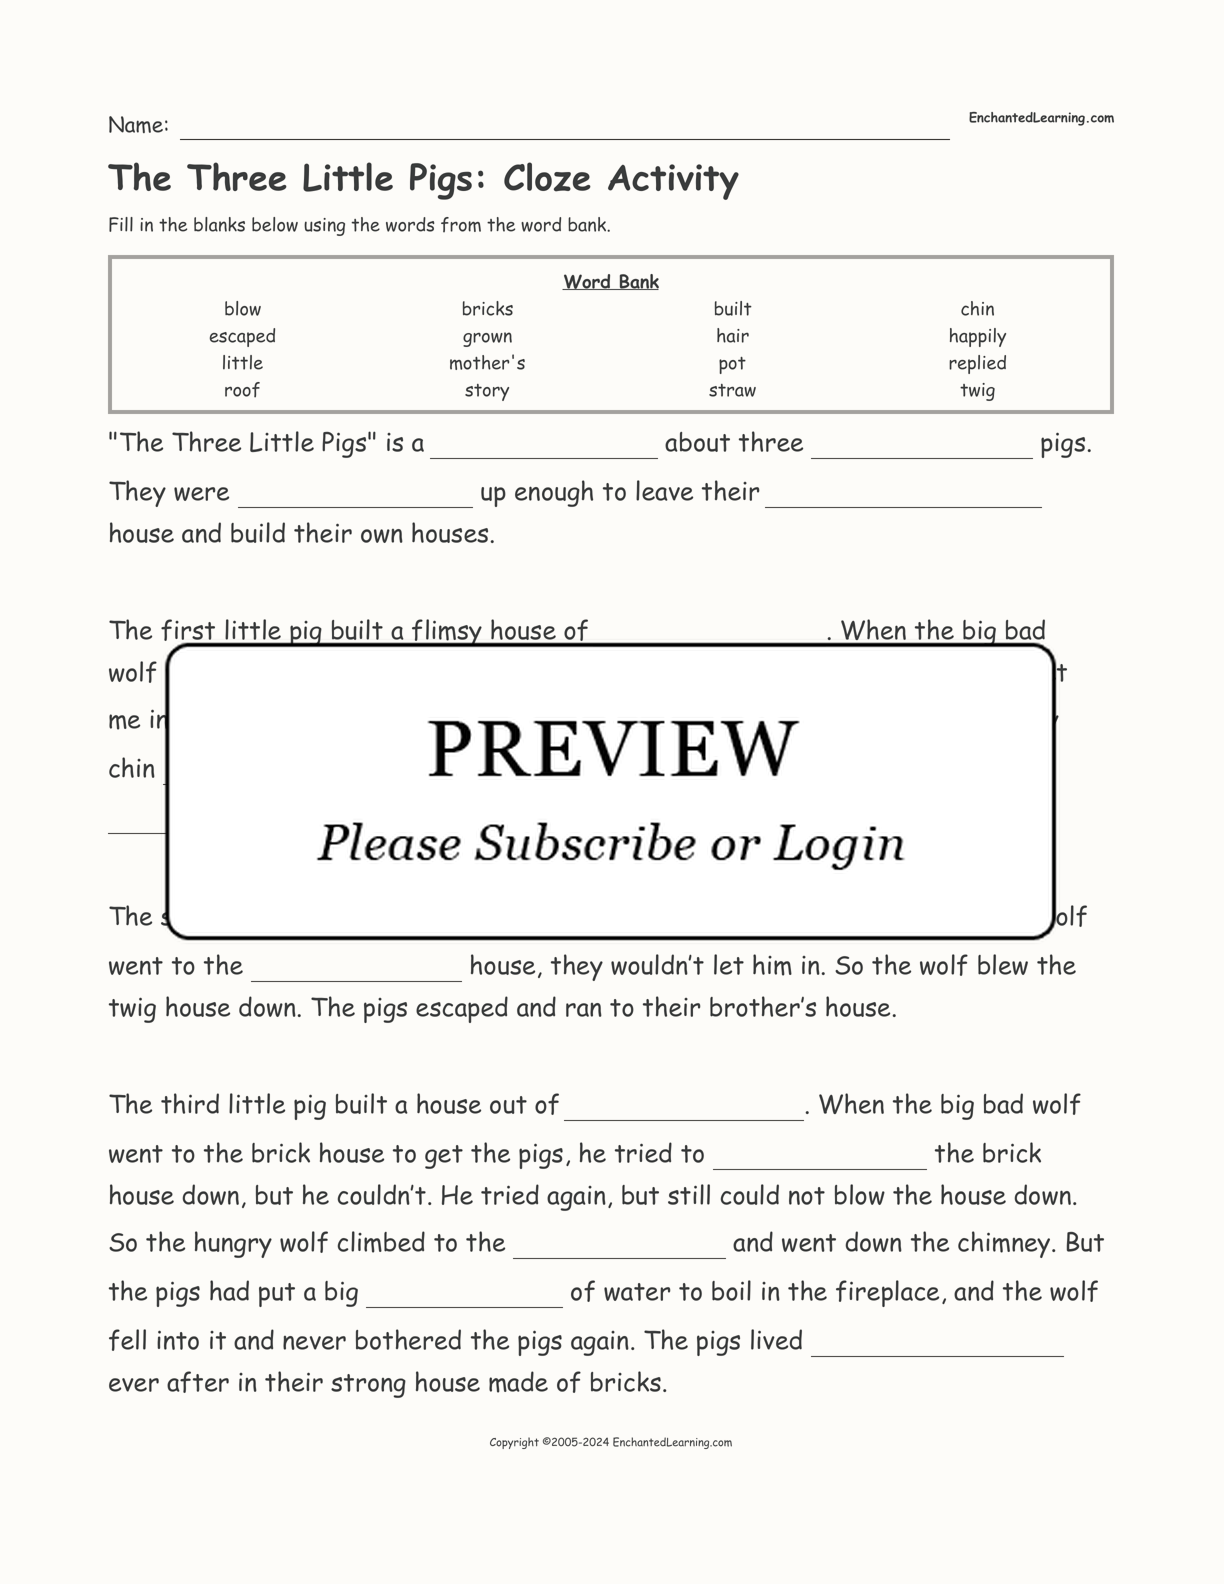 The Three Little Pigs: Cloze Activity interactive worksheet page 1